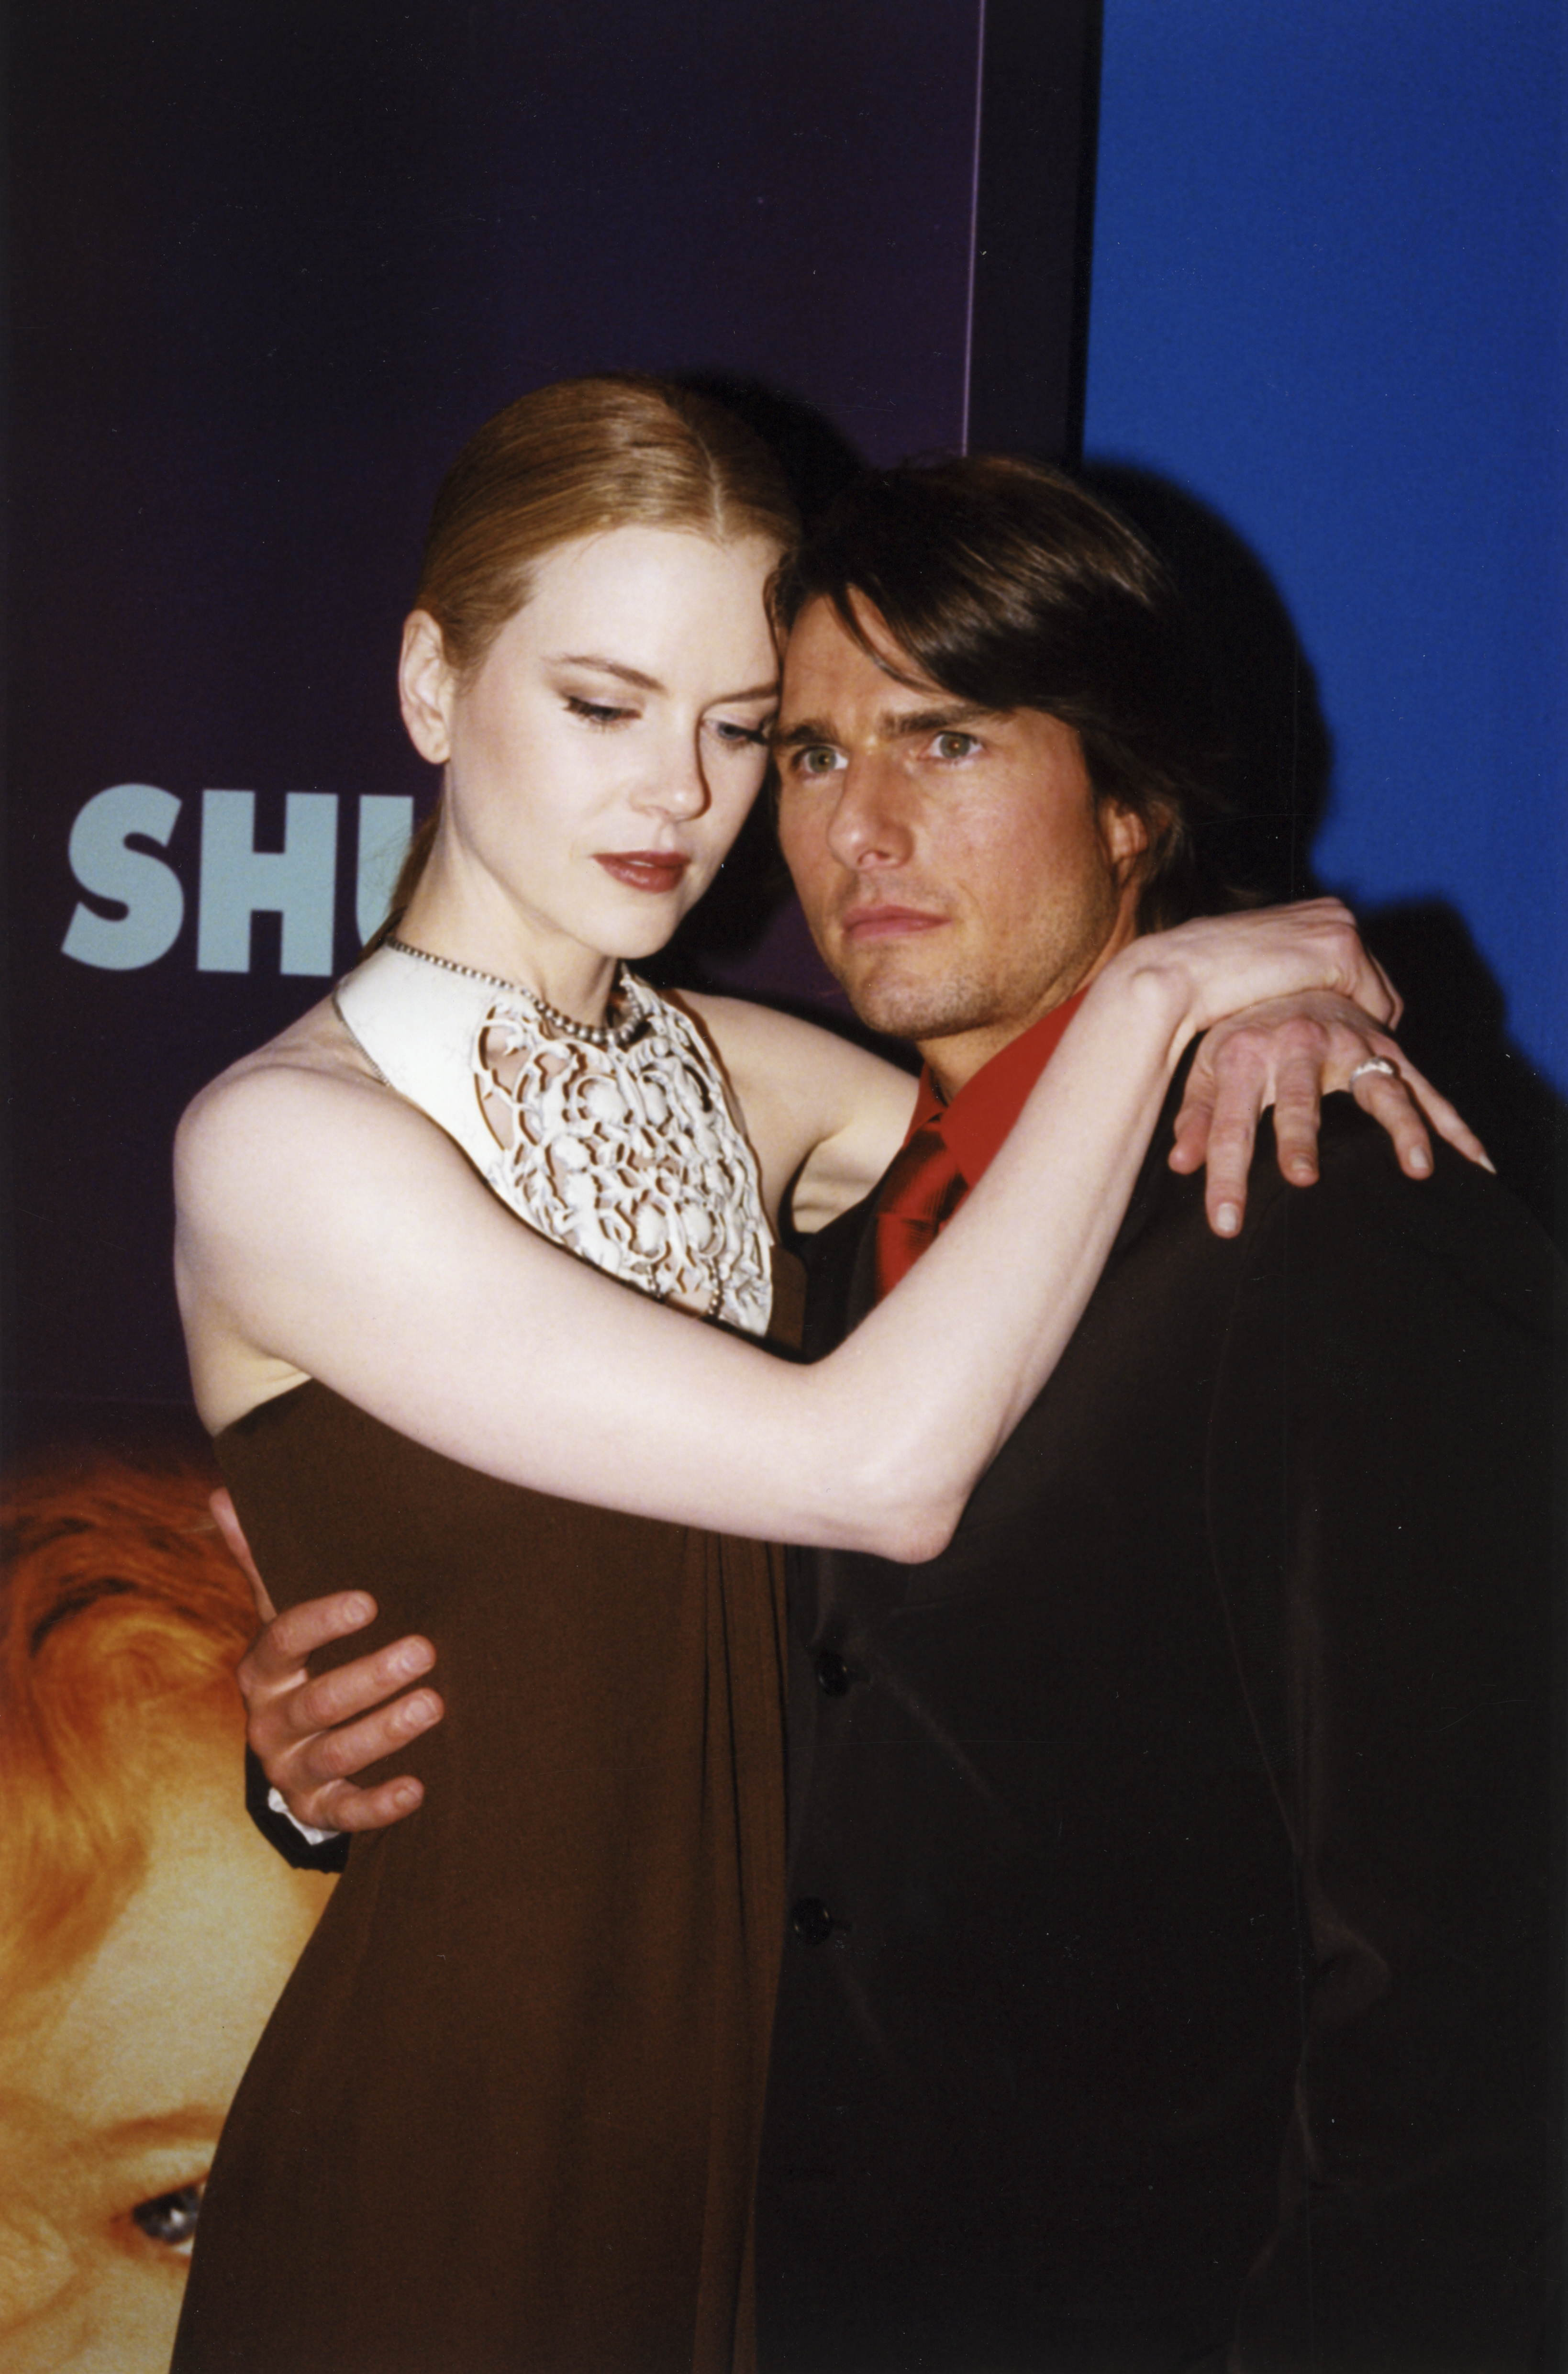 Nicole Kidman and Tom Cruise at the "Eyes Wide Shut" premiere in Paris in 1999 | Source: Getty Images